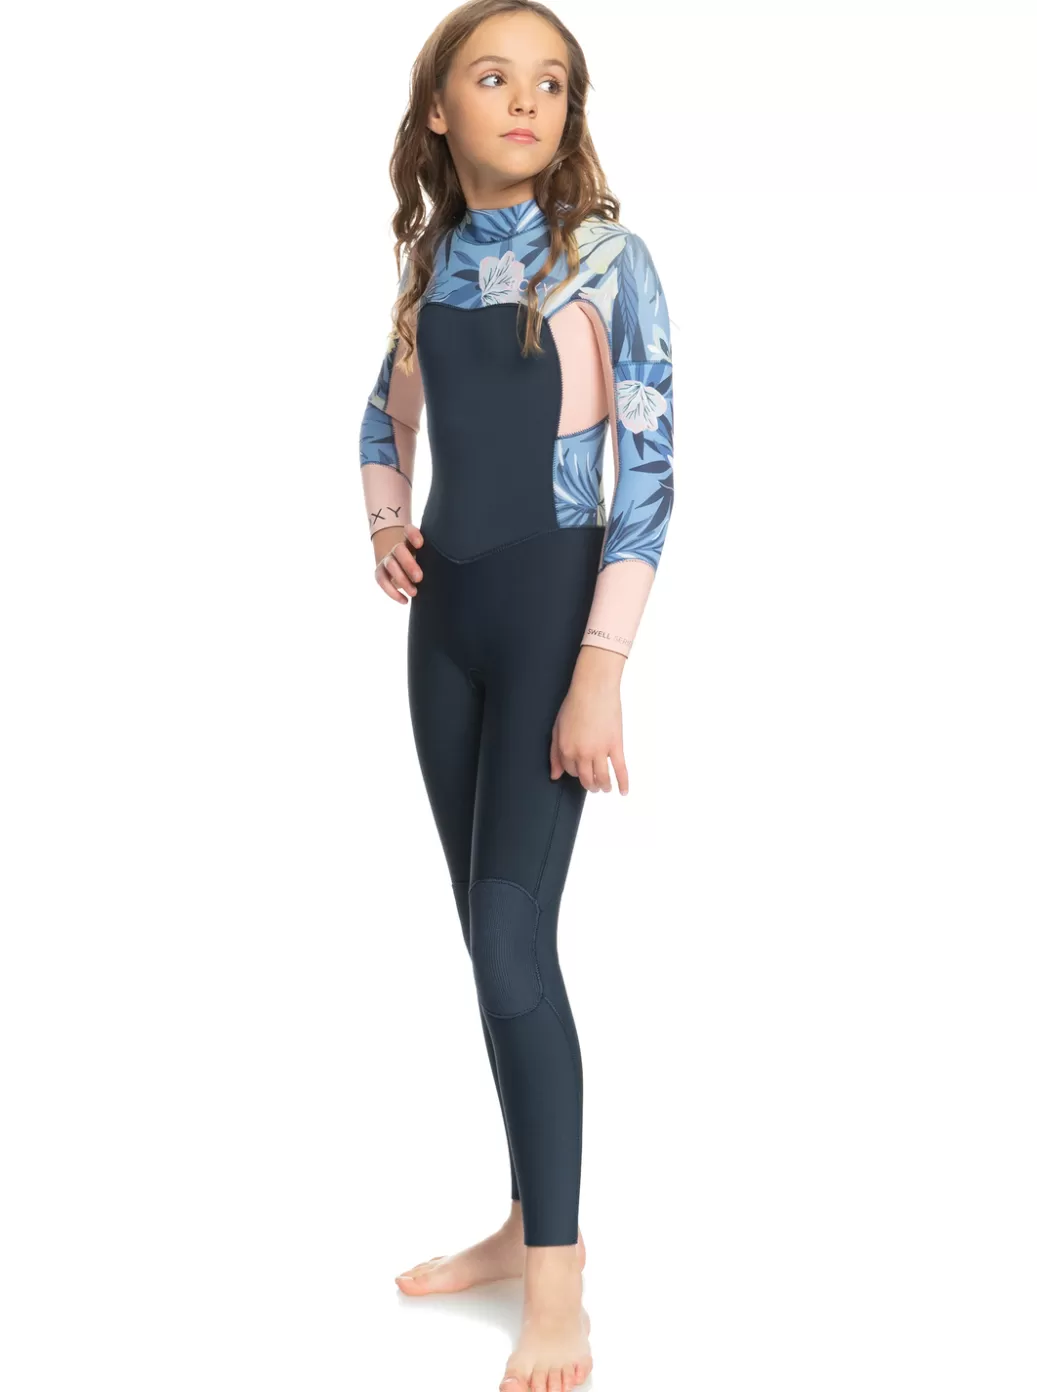 Surf | Swell Series | KIDS | WOMEN ROXY Girl's 8-16 4/3mmSwell Series Back Zip Wetsuit Allure Rg Fasso S